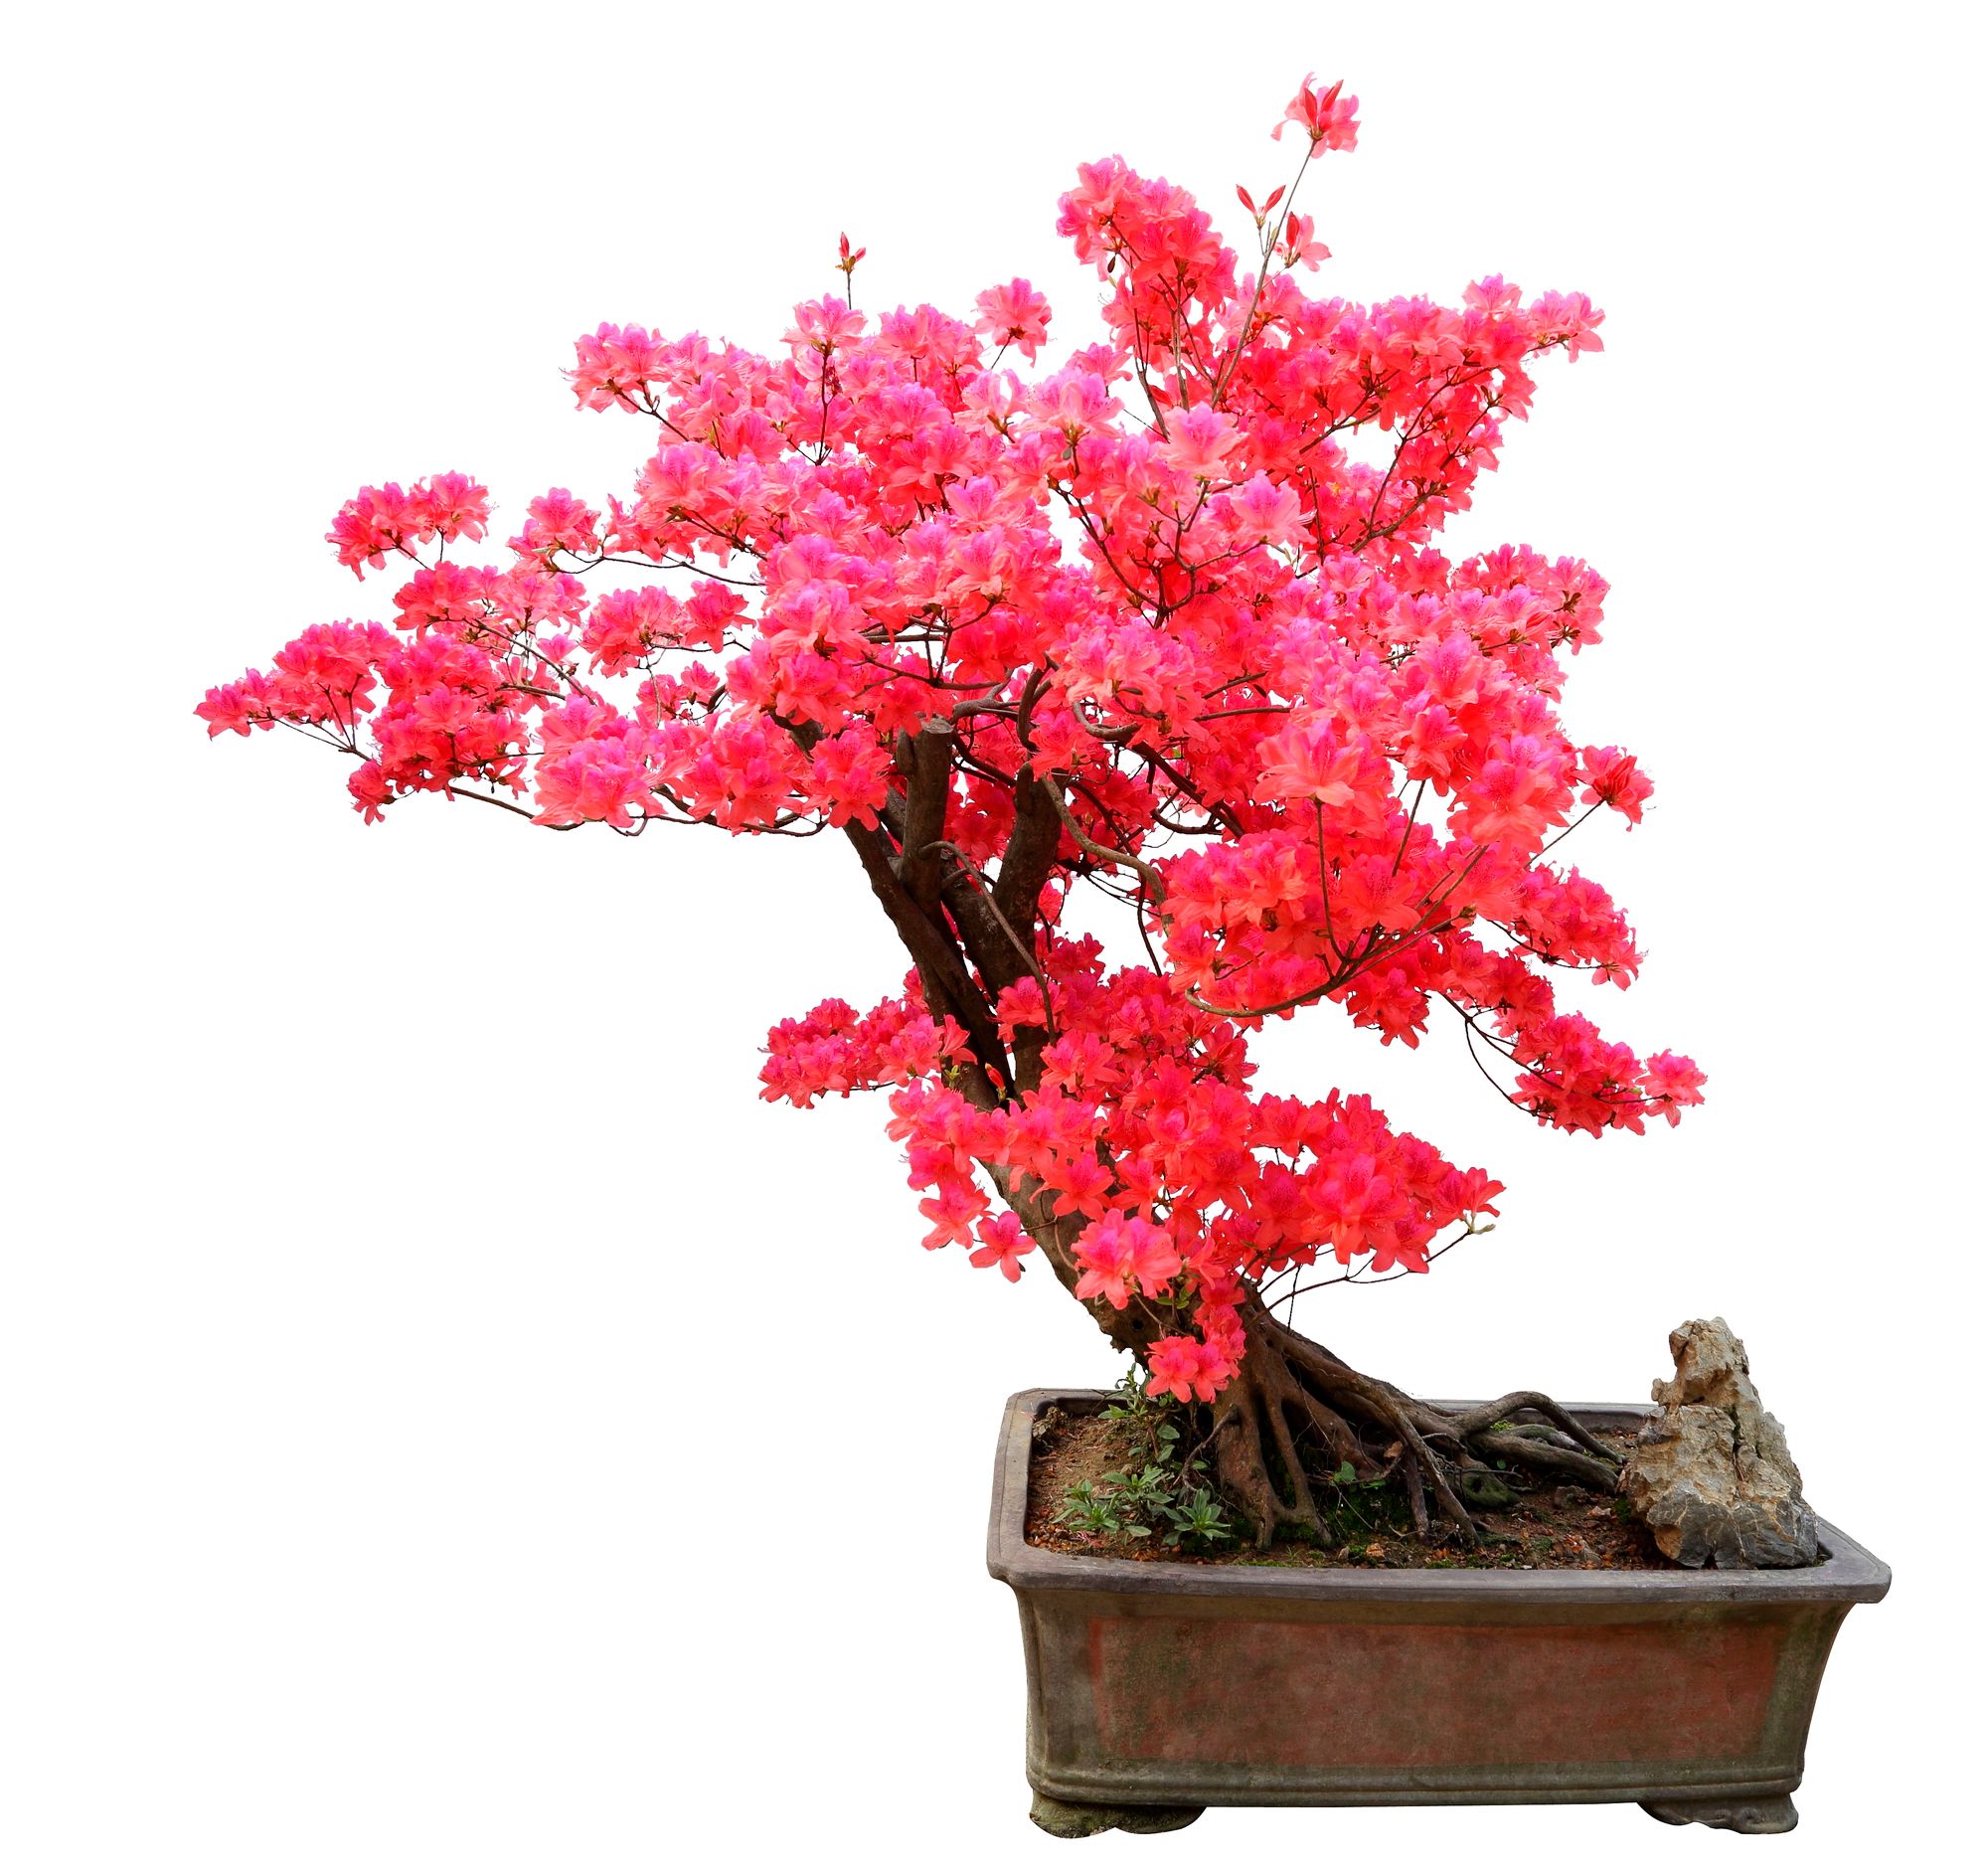 Slanting trunk of a pink flowering bonsai tree planted in a rectangular old pot